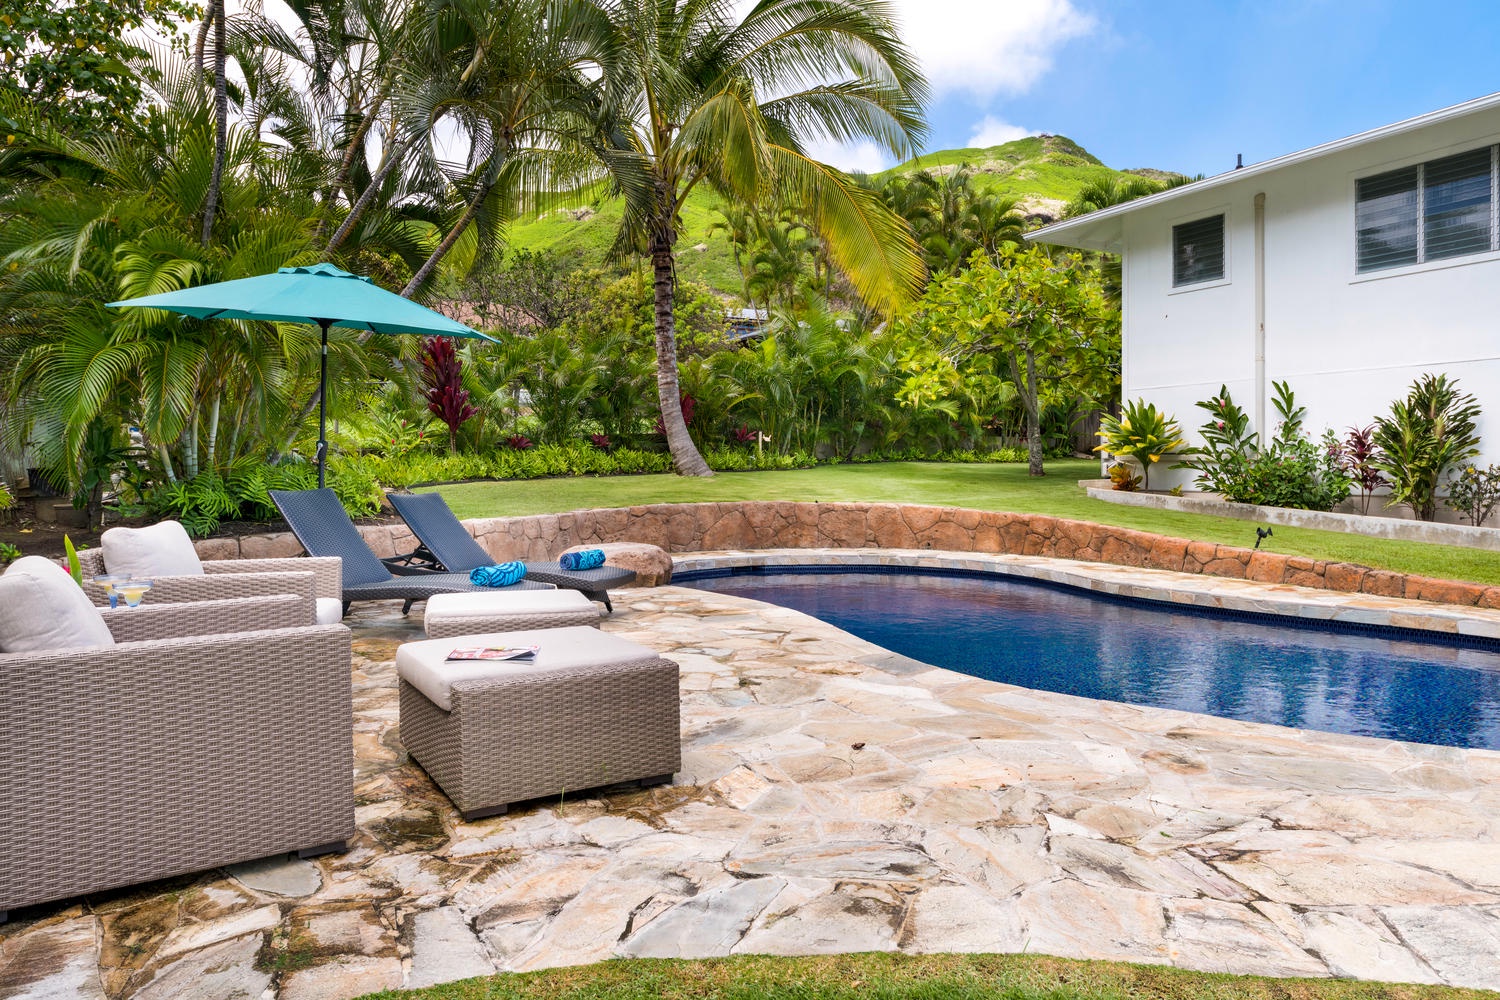 Kailua Vacation Rentals, Lanikai Cottage - Brand new in-ground pool, with large back yard.